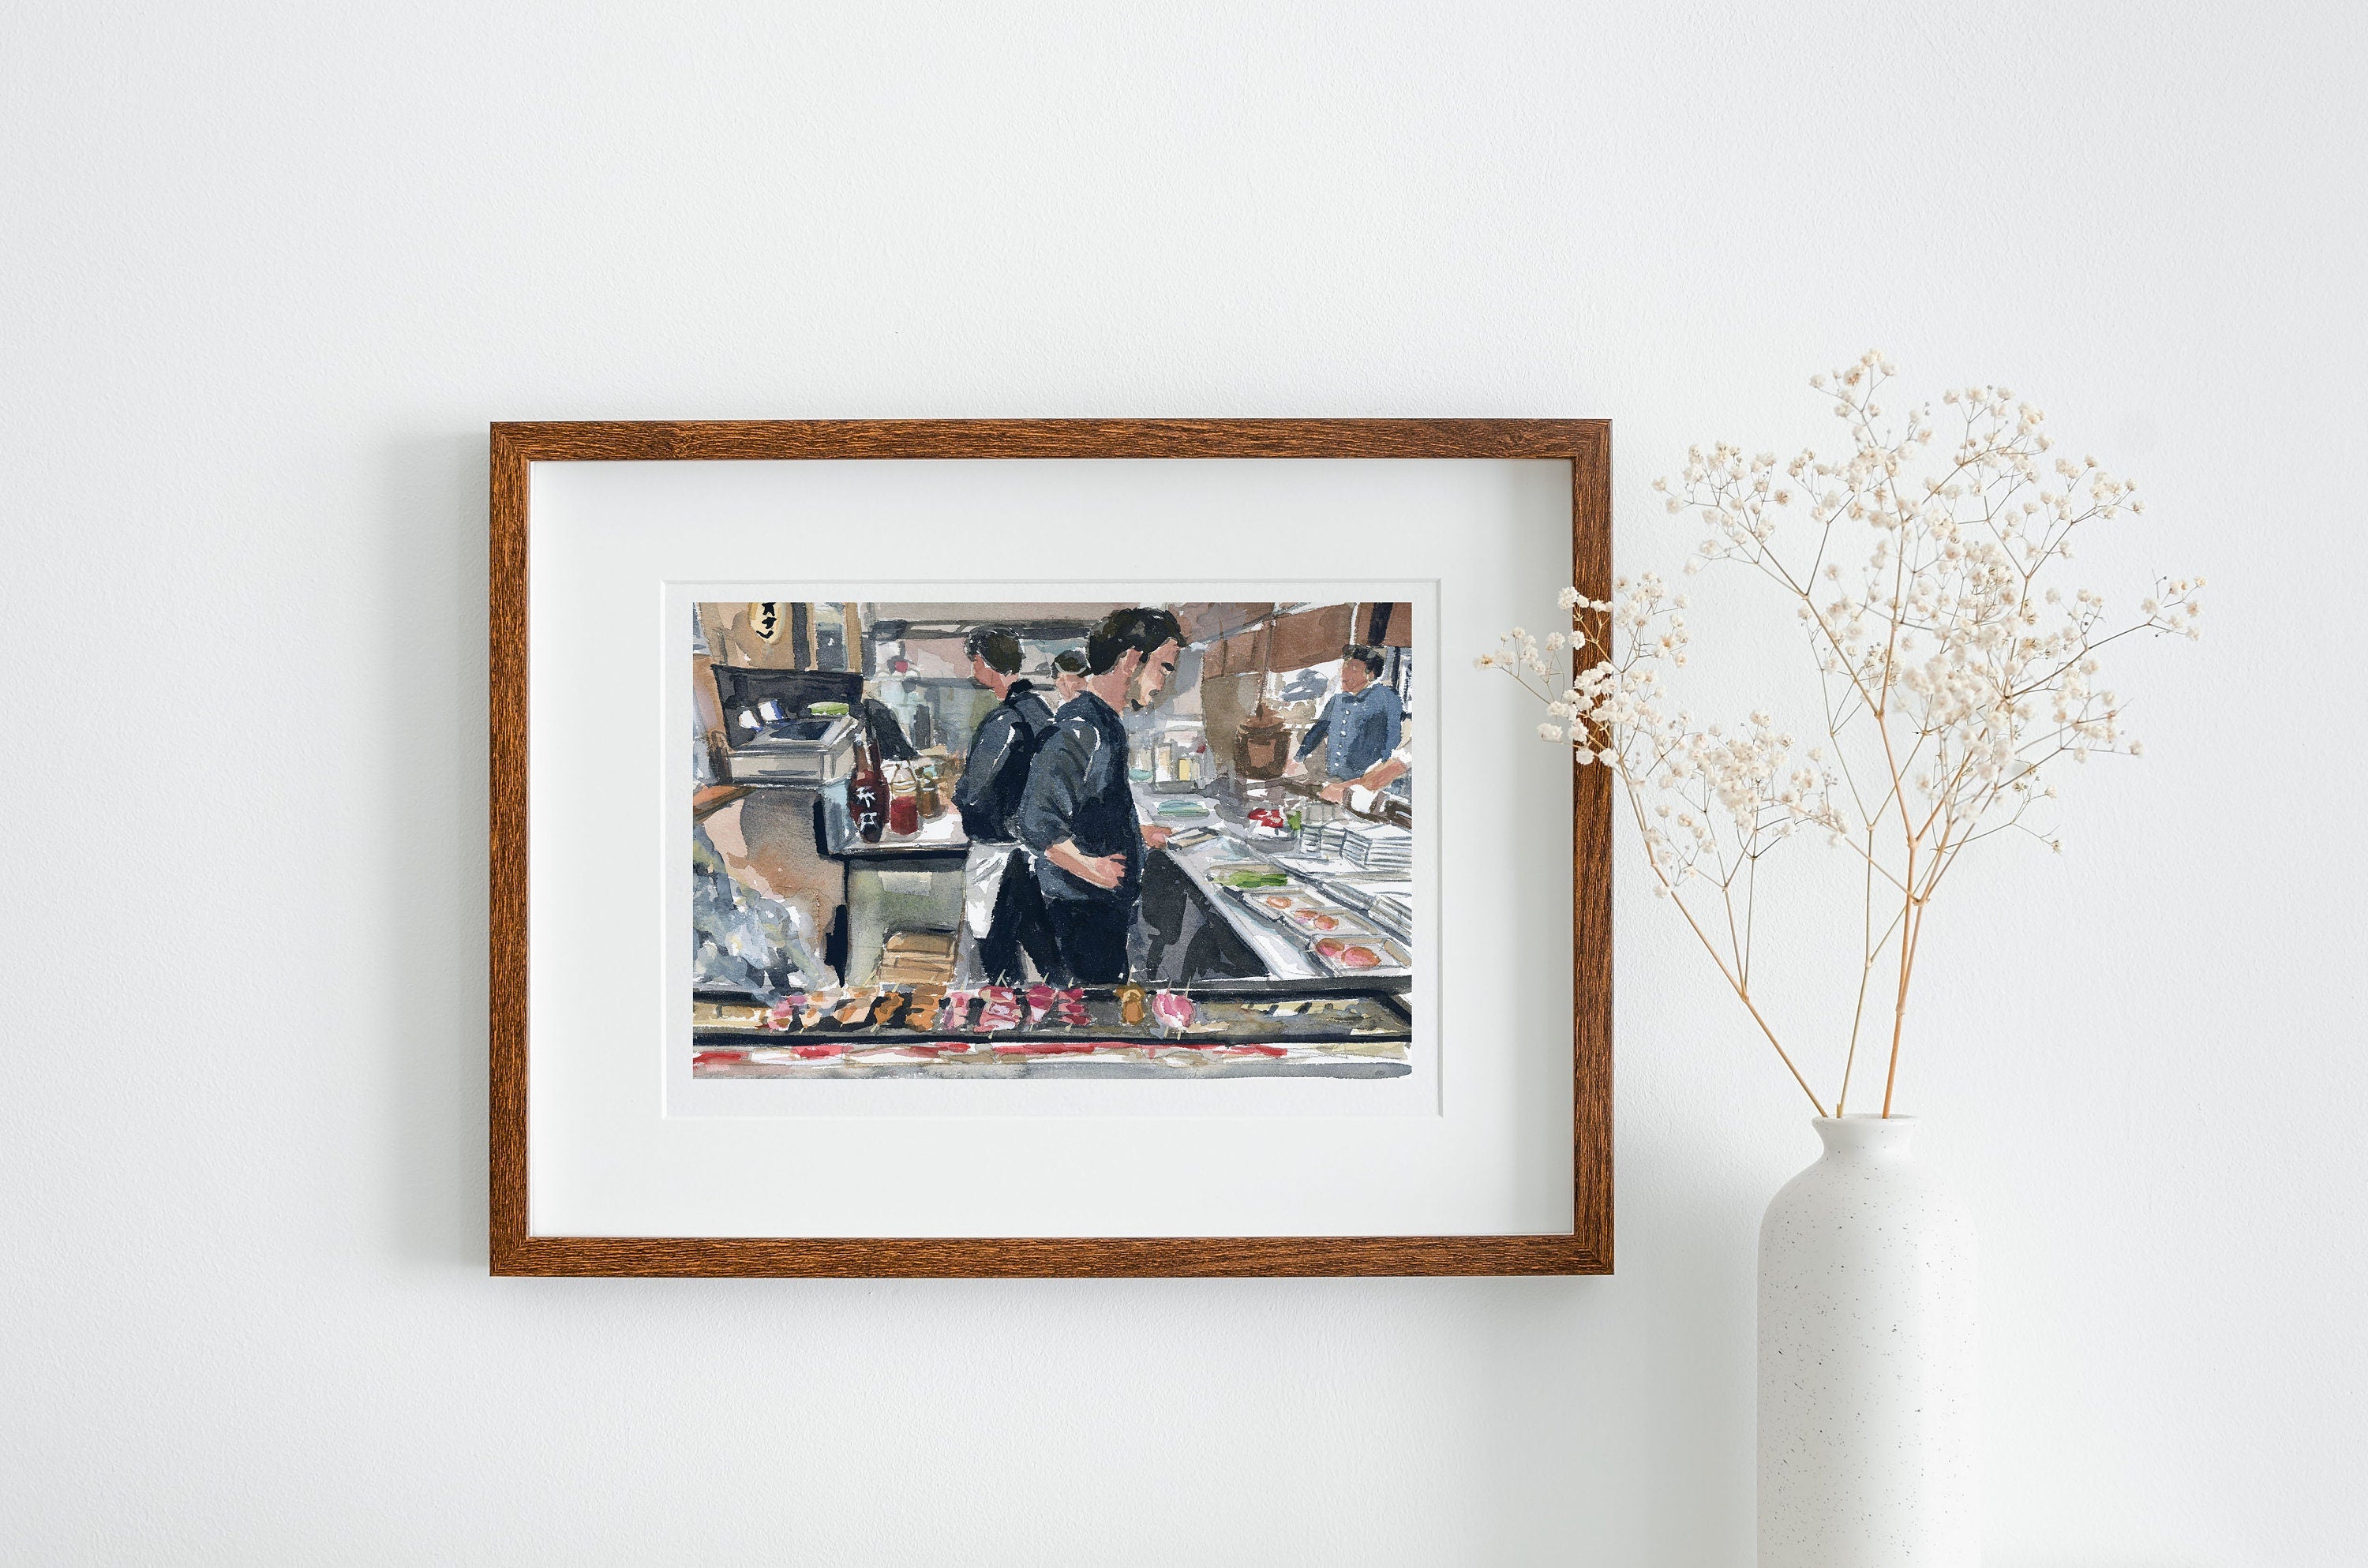 Memory Alley - Japanese Street Market print of painting by Medjool Studio. Print of original gouache painting of a small Japanese BBQ restaurant in Memory Alley, Tokyo, Japan. The smell of steam, BBQ and murmur of quiet conversation is captured in this piece.